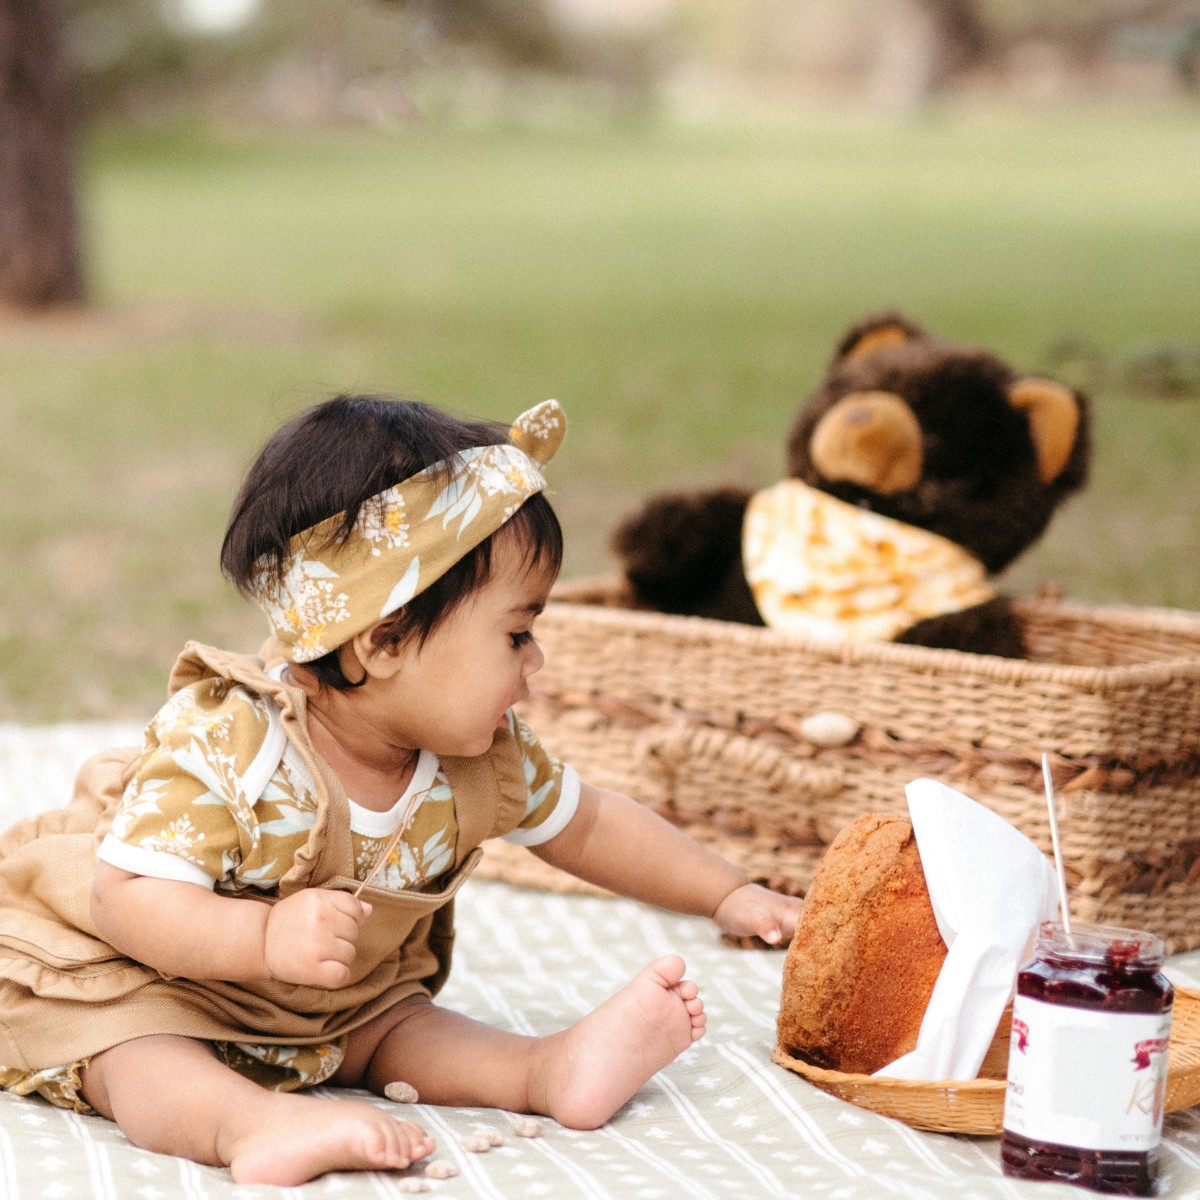 Baby girl sitting on a picnic blanket with a picnic basket with a stuffed bear and wearing the Gold Floral organic cotton Knotted Headband by Milkbarn